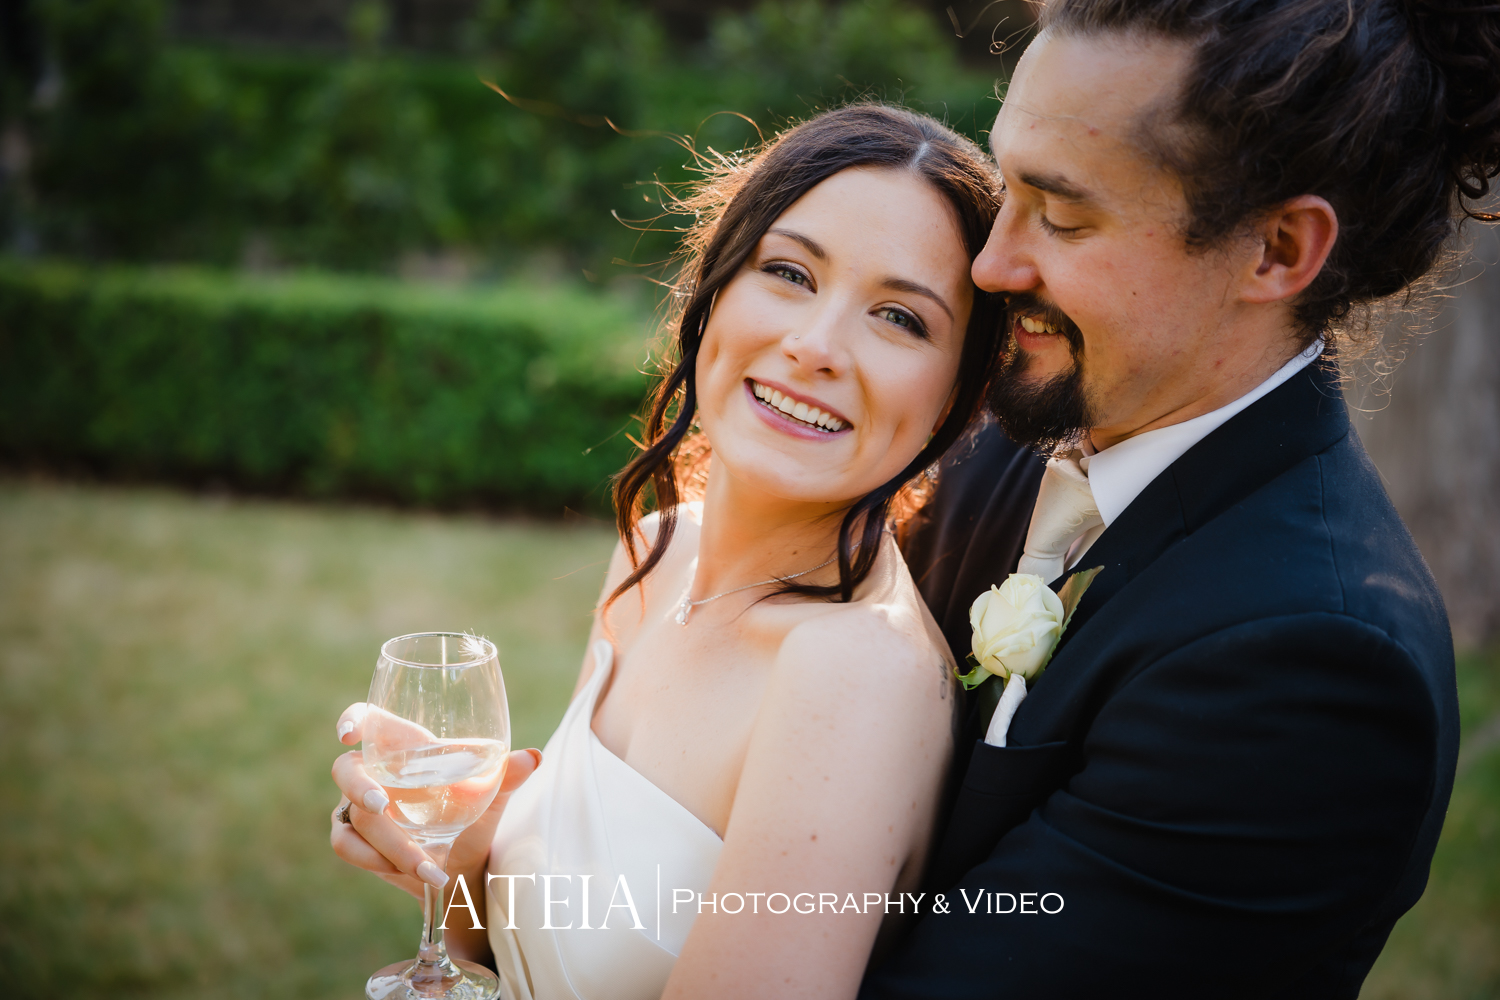 , Tammy and Jayden&#8217;s wedding photography at Meadowbank Estate captured by ATEIA Photography &#038; Video